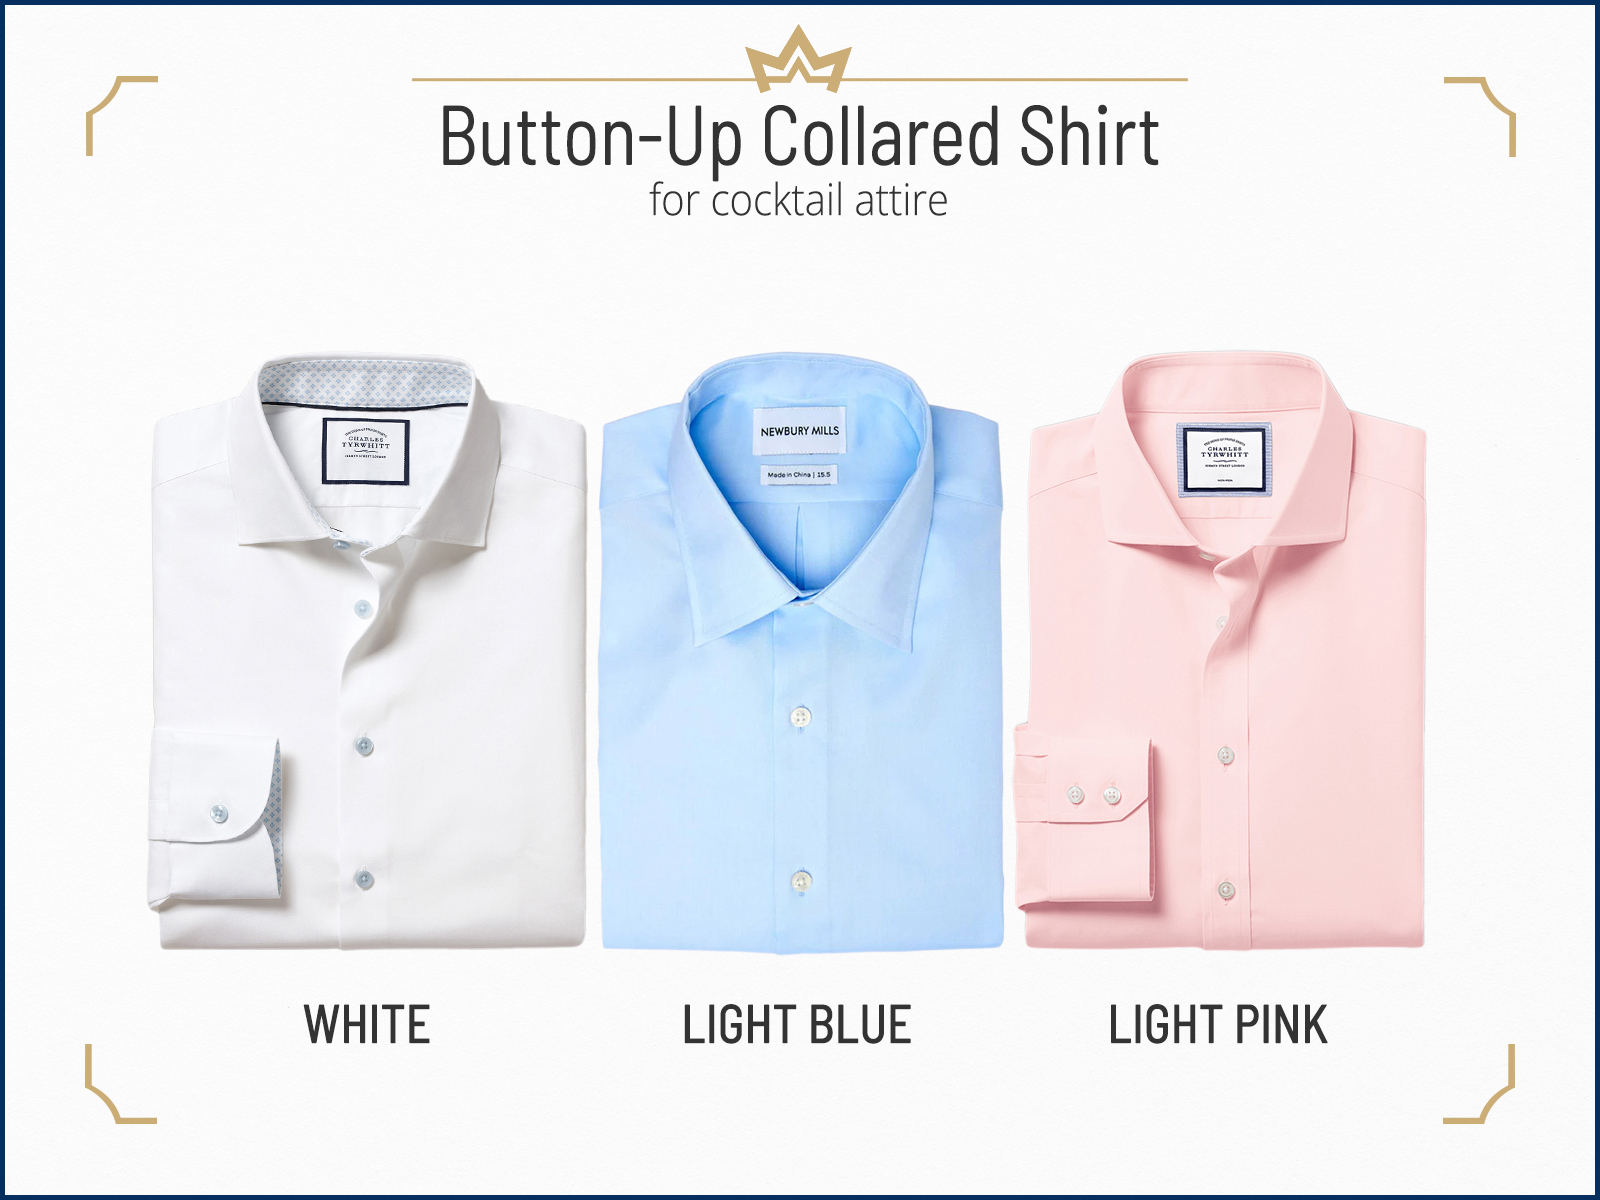 Recommended button-up dress shirt colors for cocktail attire